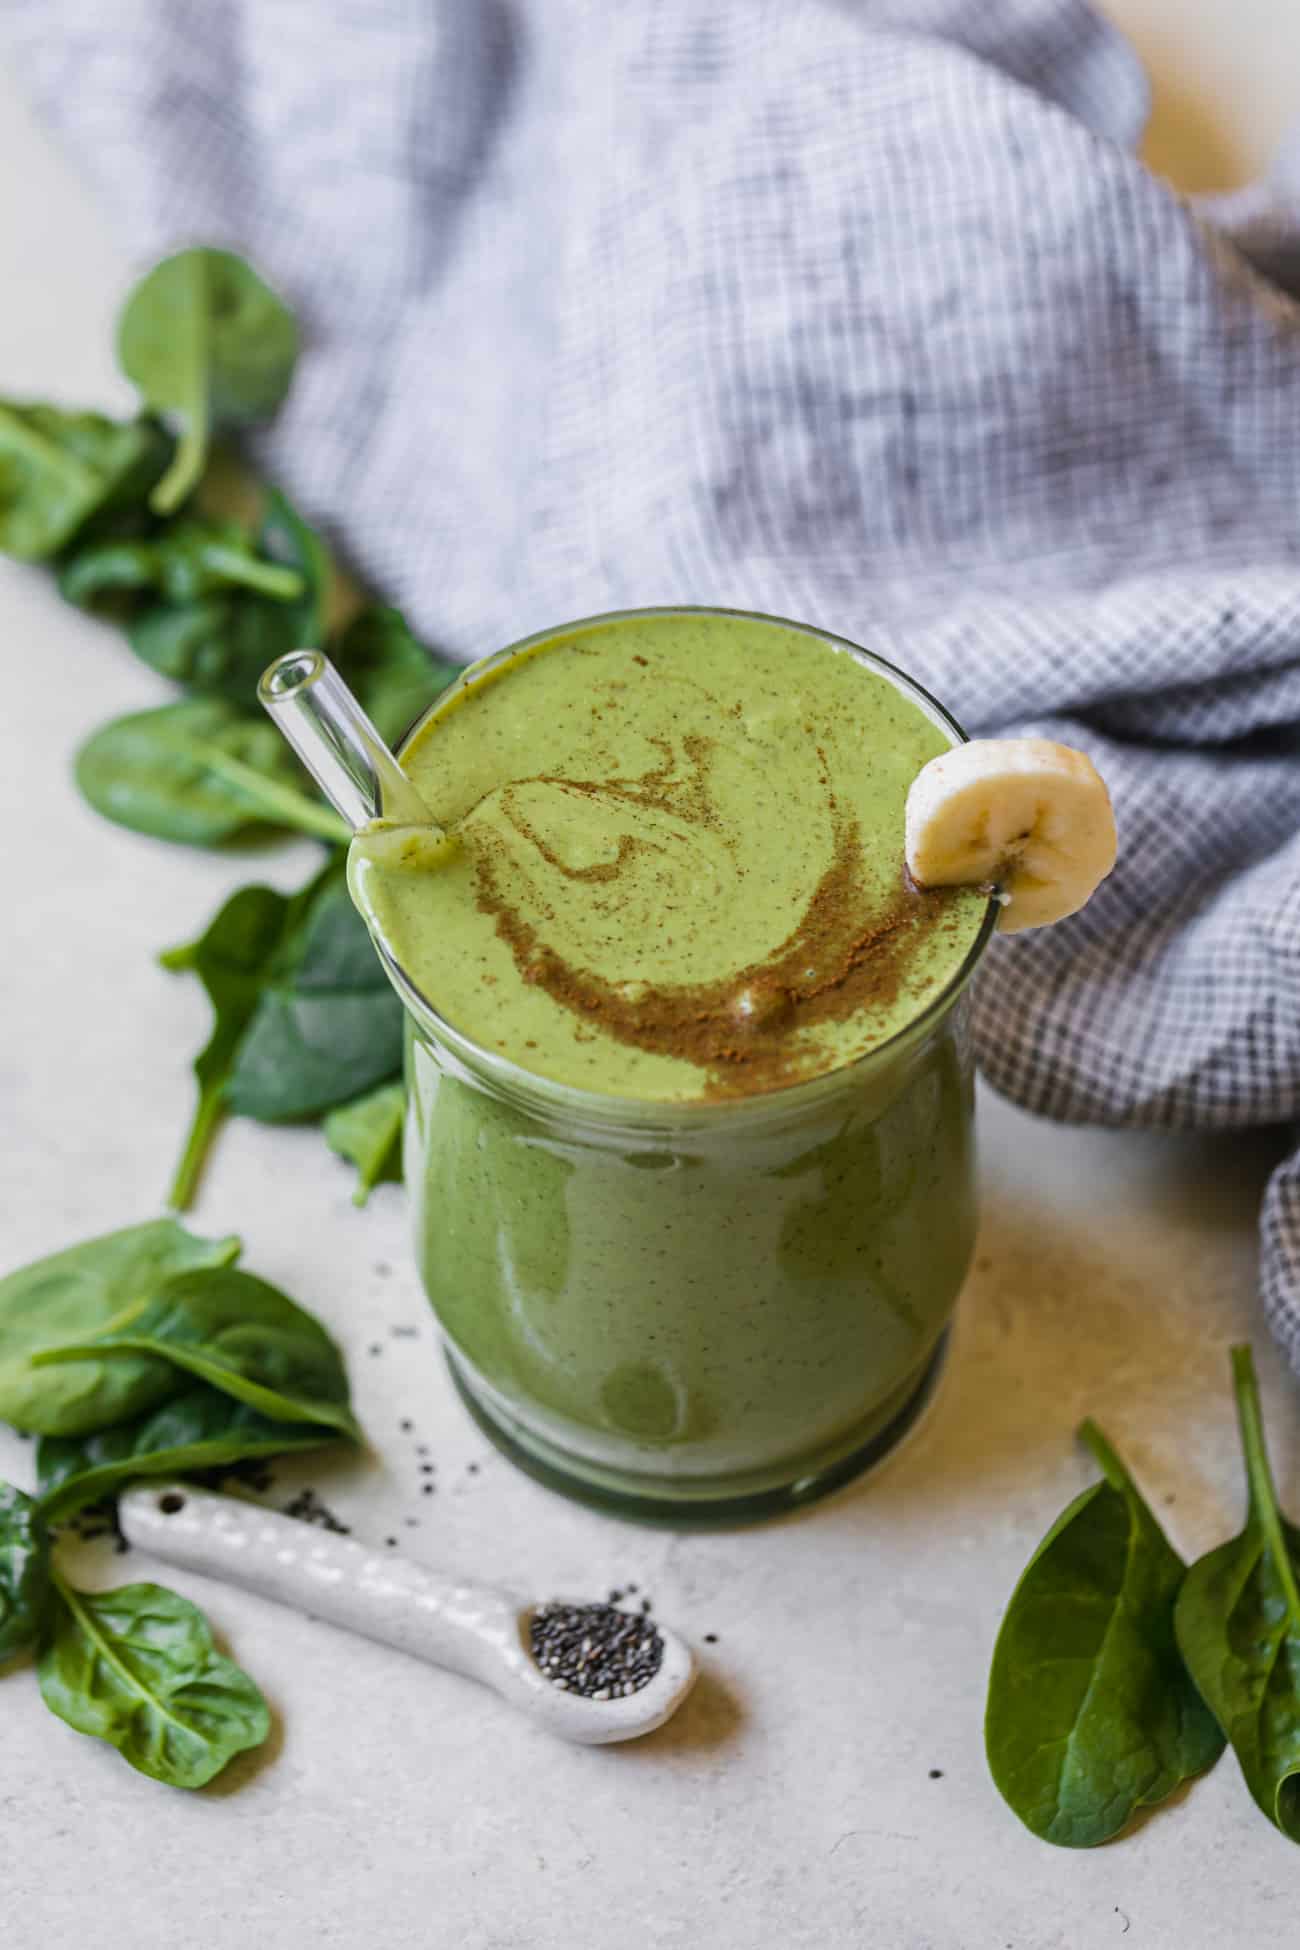 banana spinach smoothie with spinach leaves and linen napkin